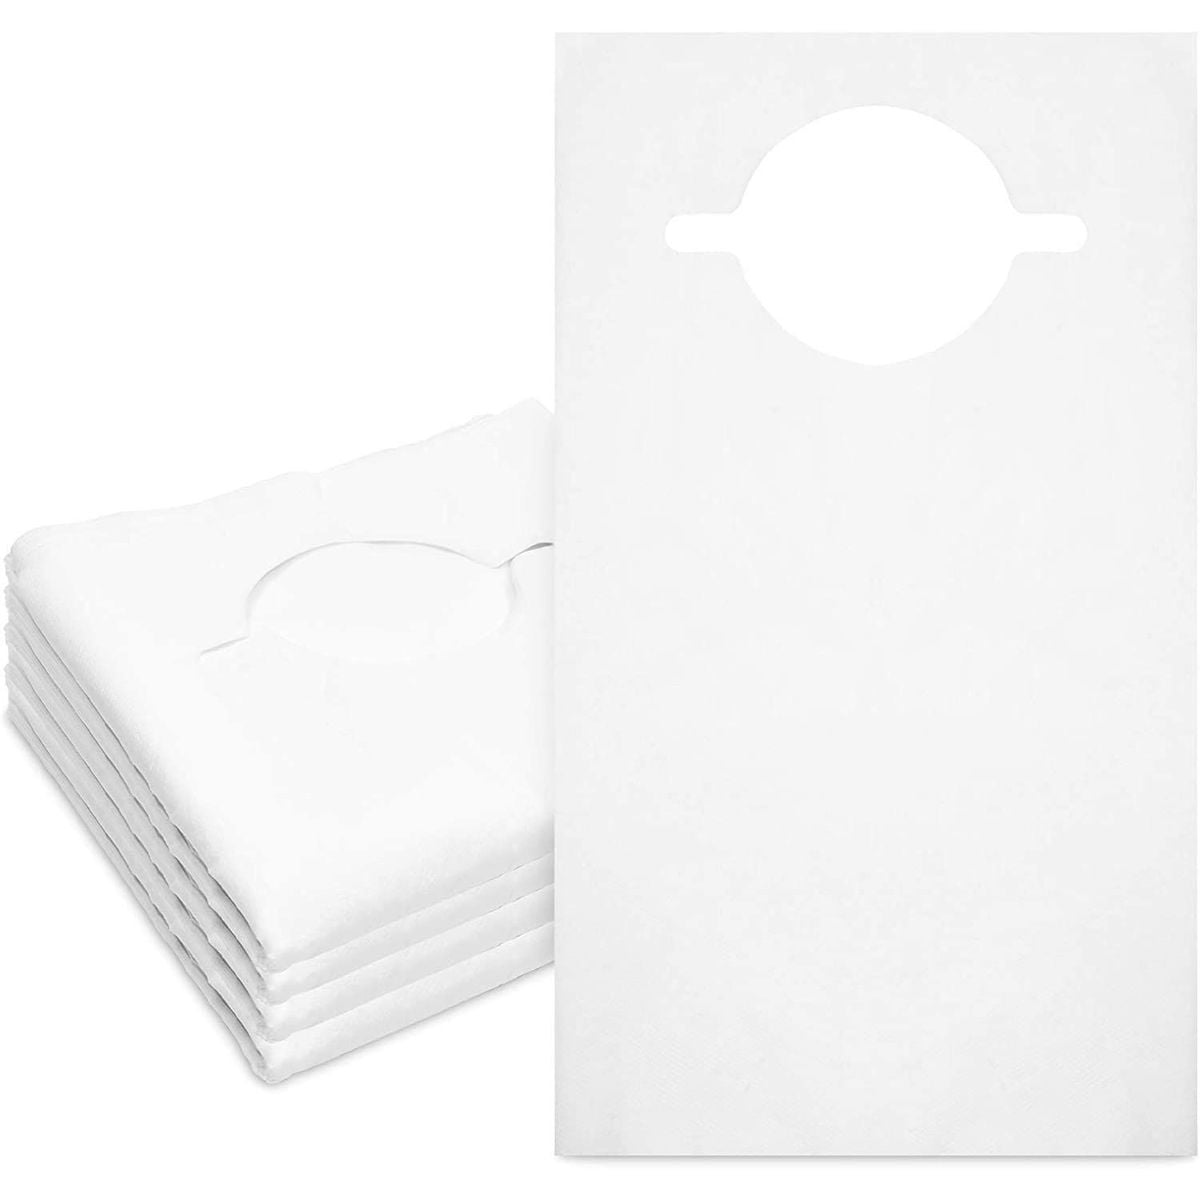 100 PACK OF WHITE DISPOSABLE PLASTIC ADULT BIBS FREE SHIPPING 